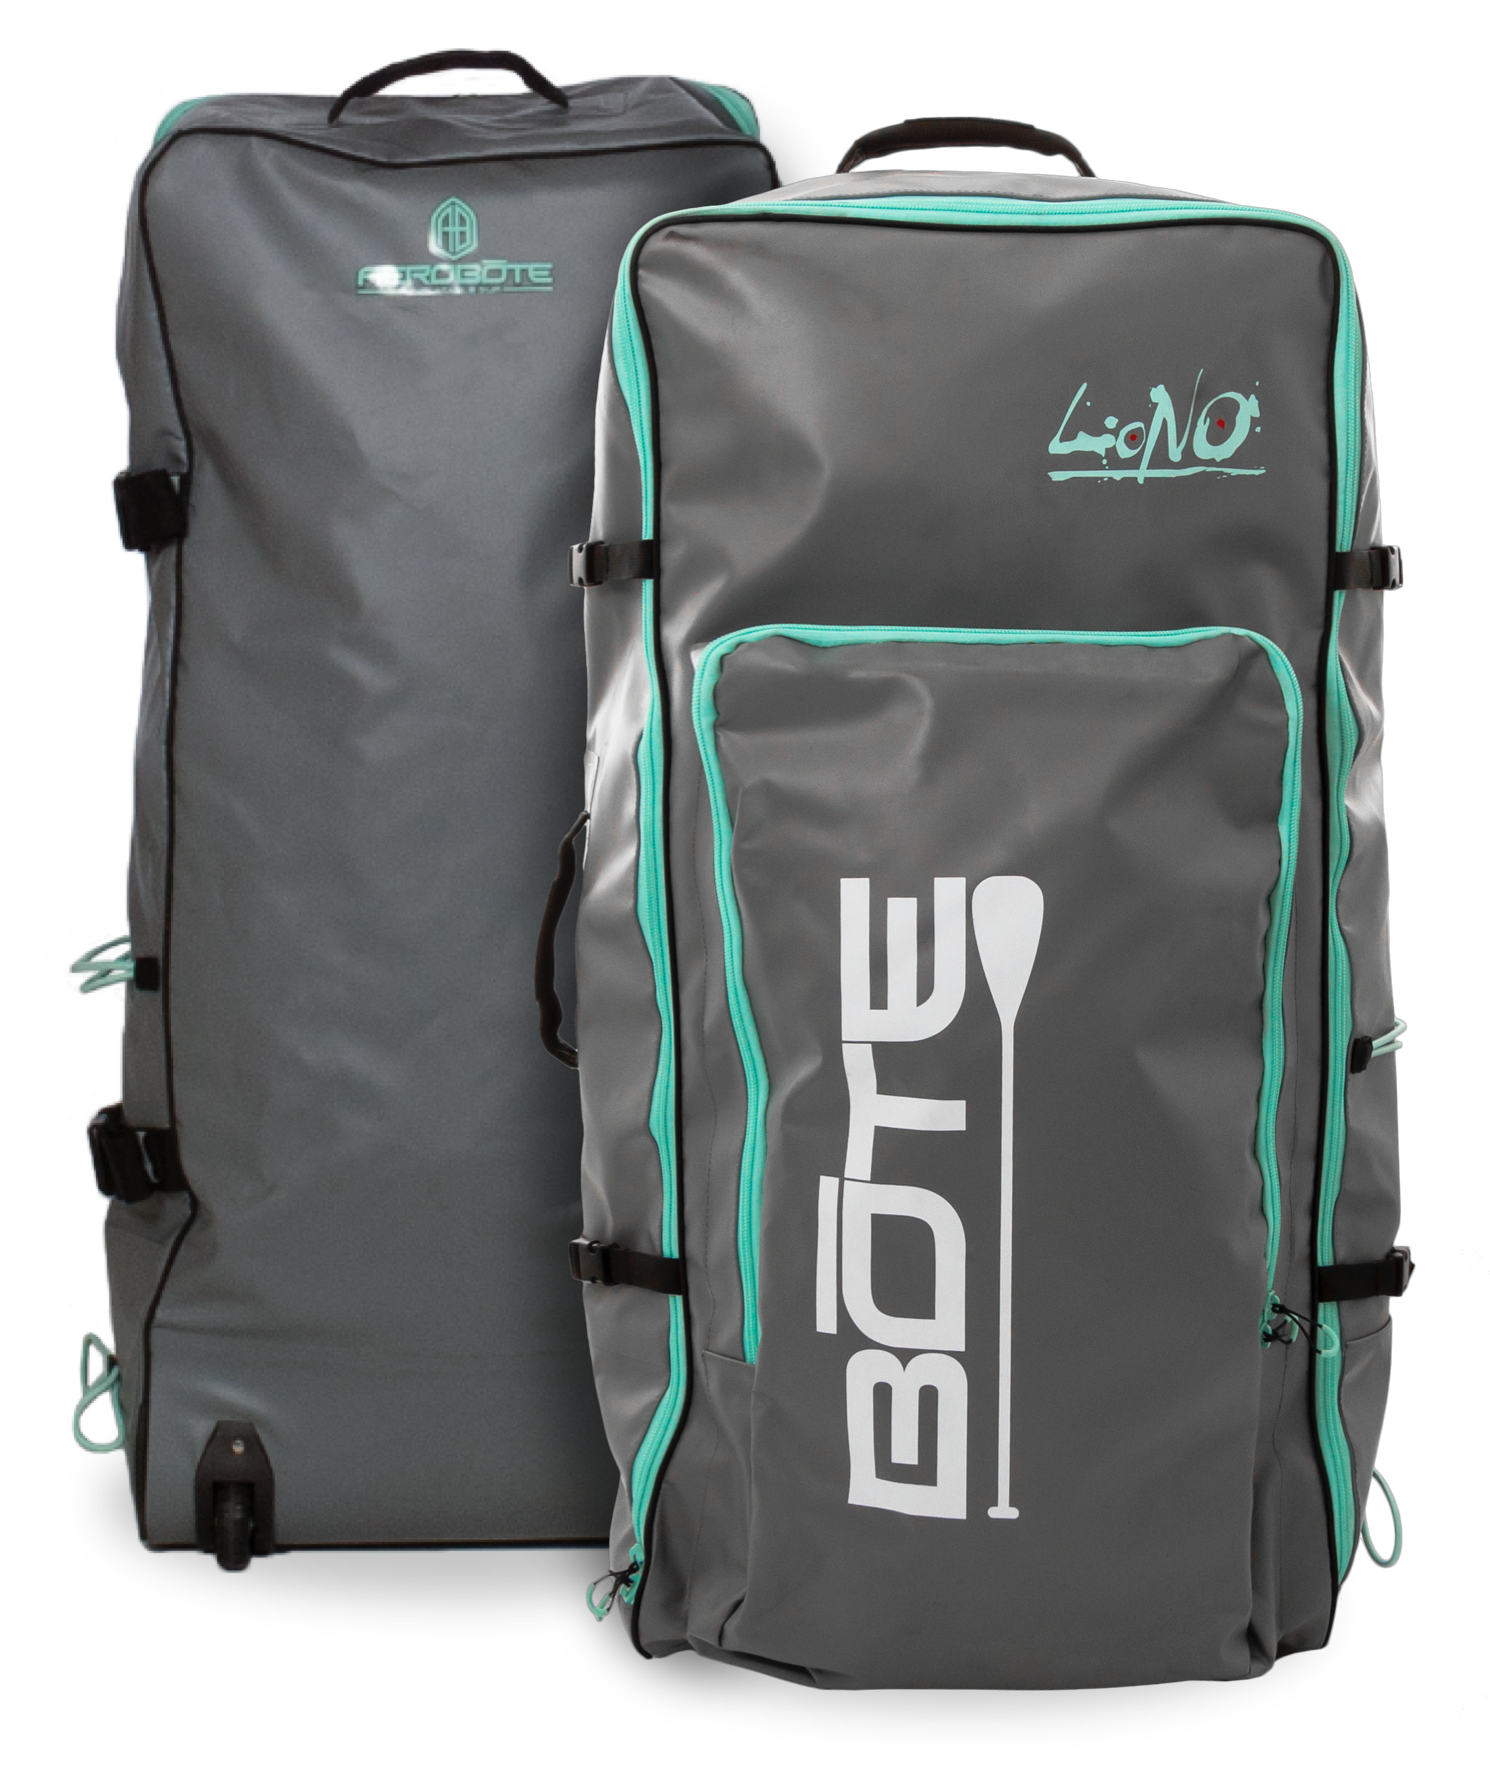 The LONO Aero Travel bag has rolling wheels to make transport quick and easy